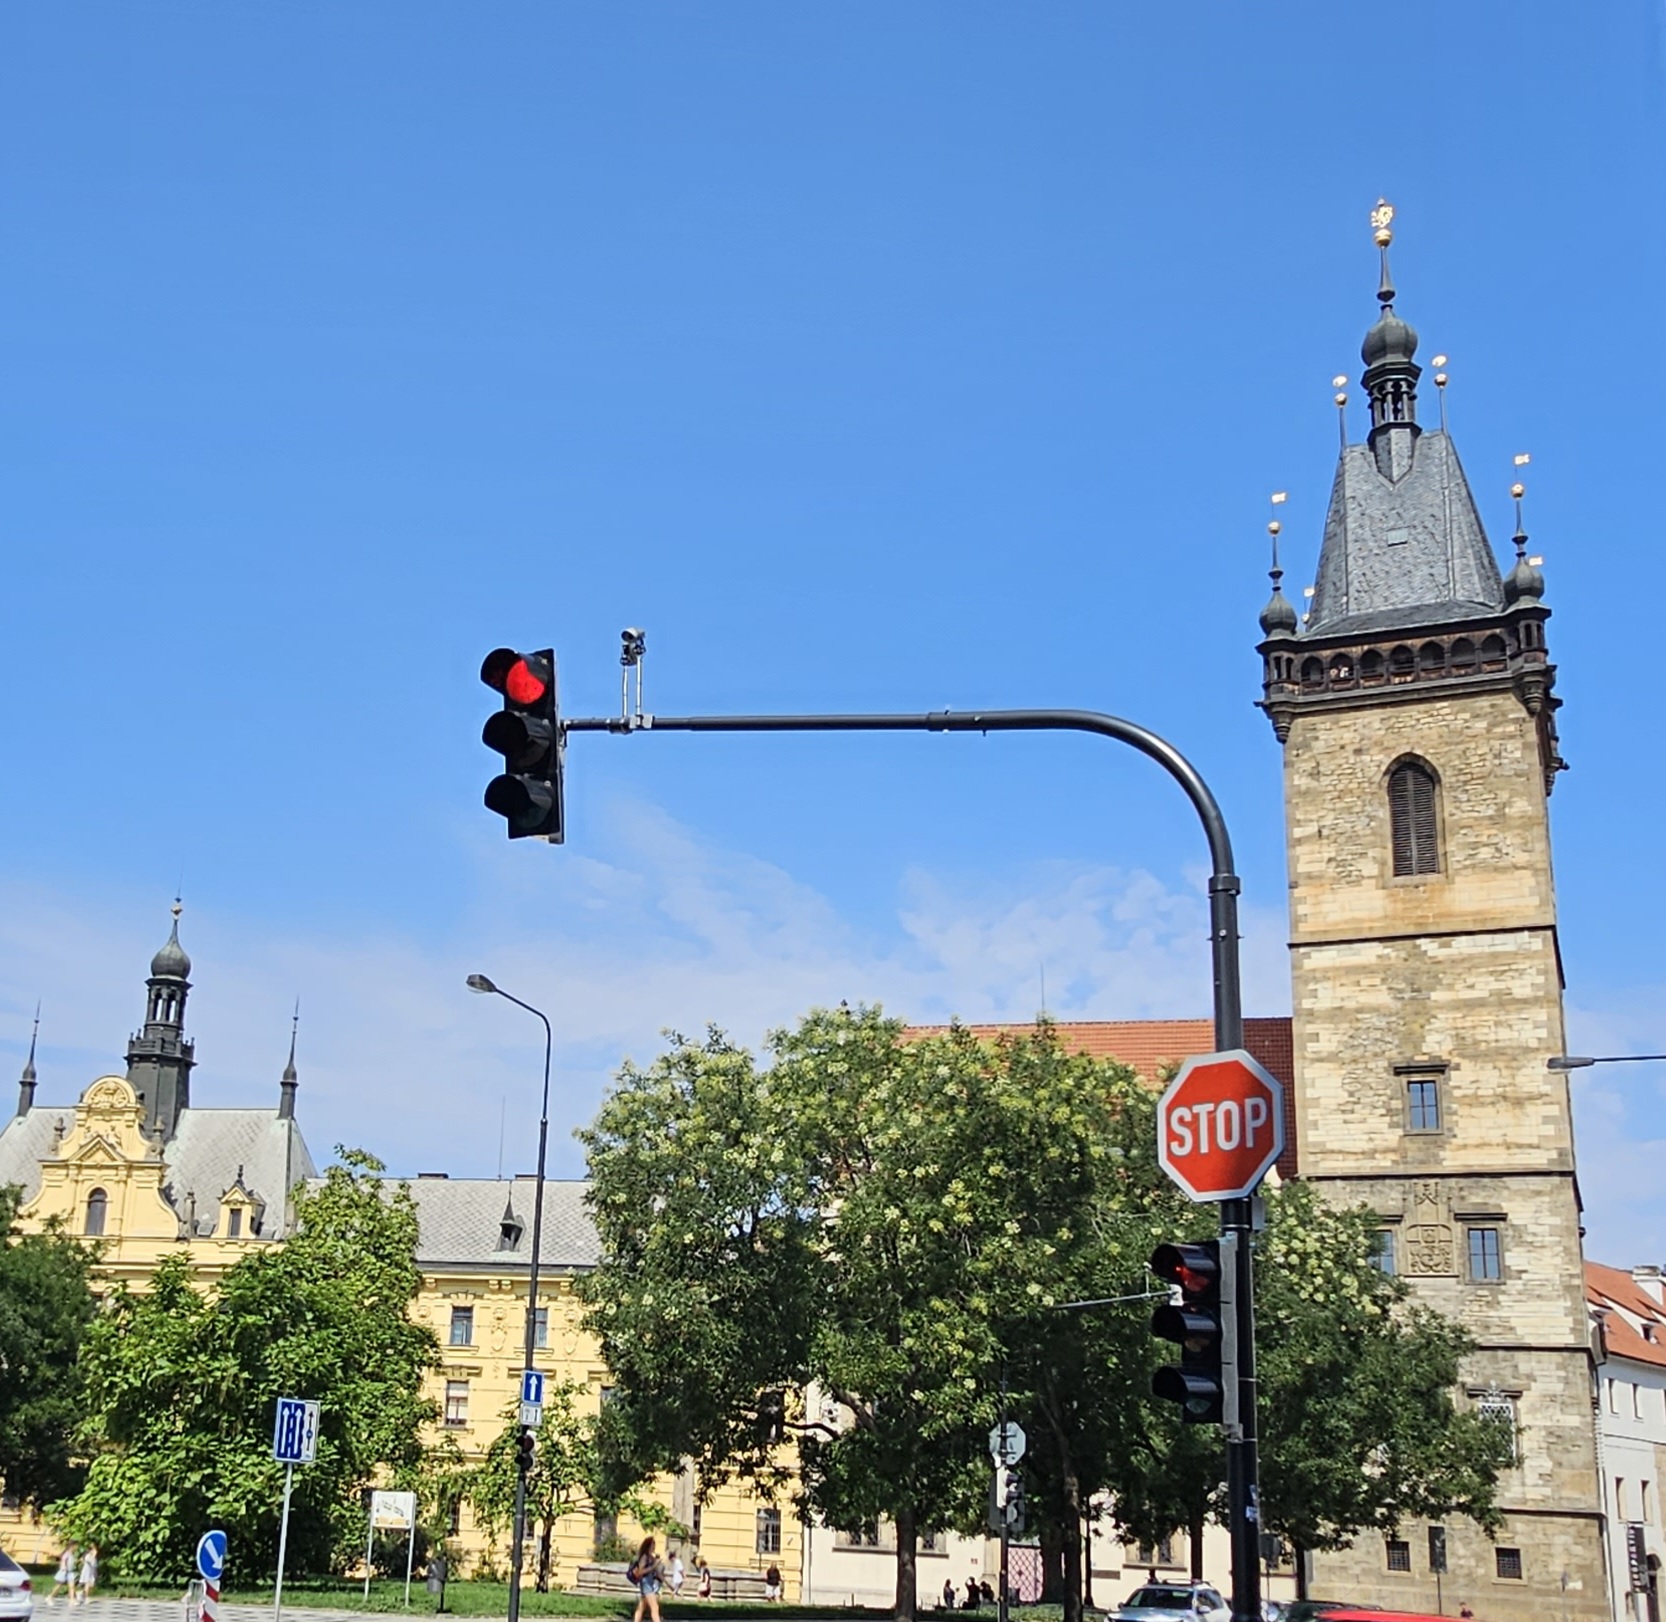 The New Town Hall in Prague, where the first Defenestration took place in 1419. A tower with three windows can be seen across road. In front of the town hall are some trees. There is a traffic light above the trees.